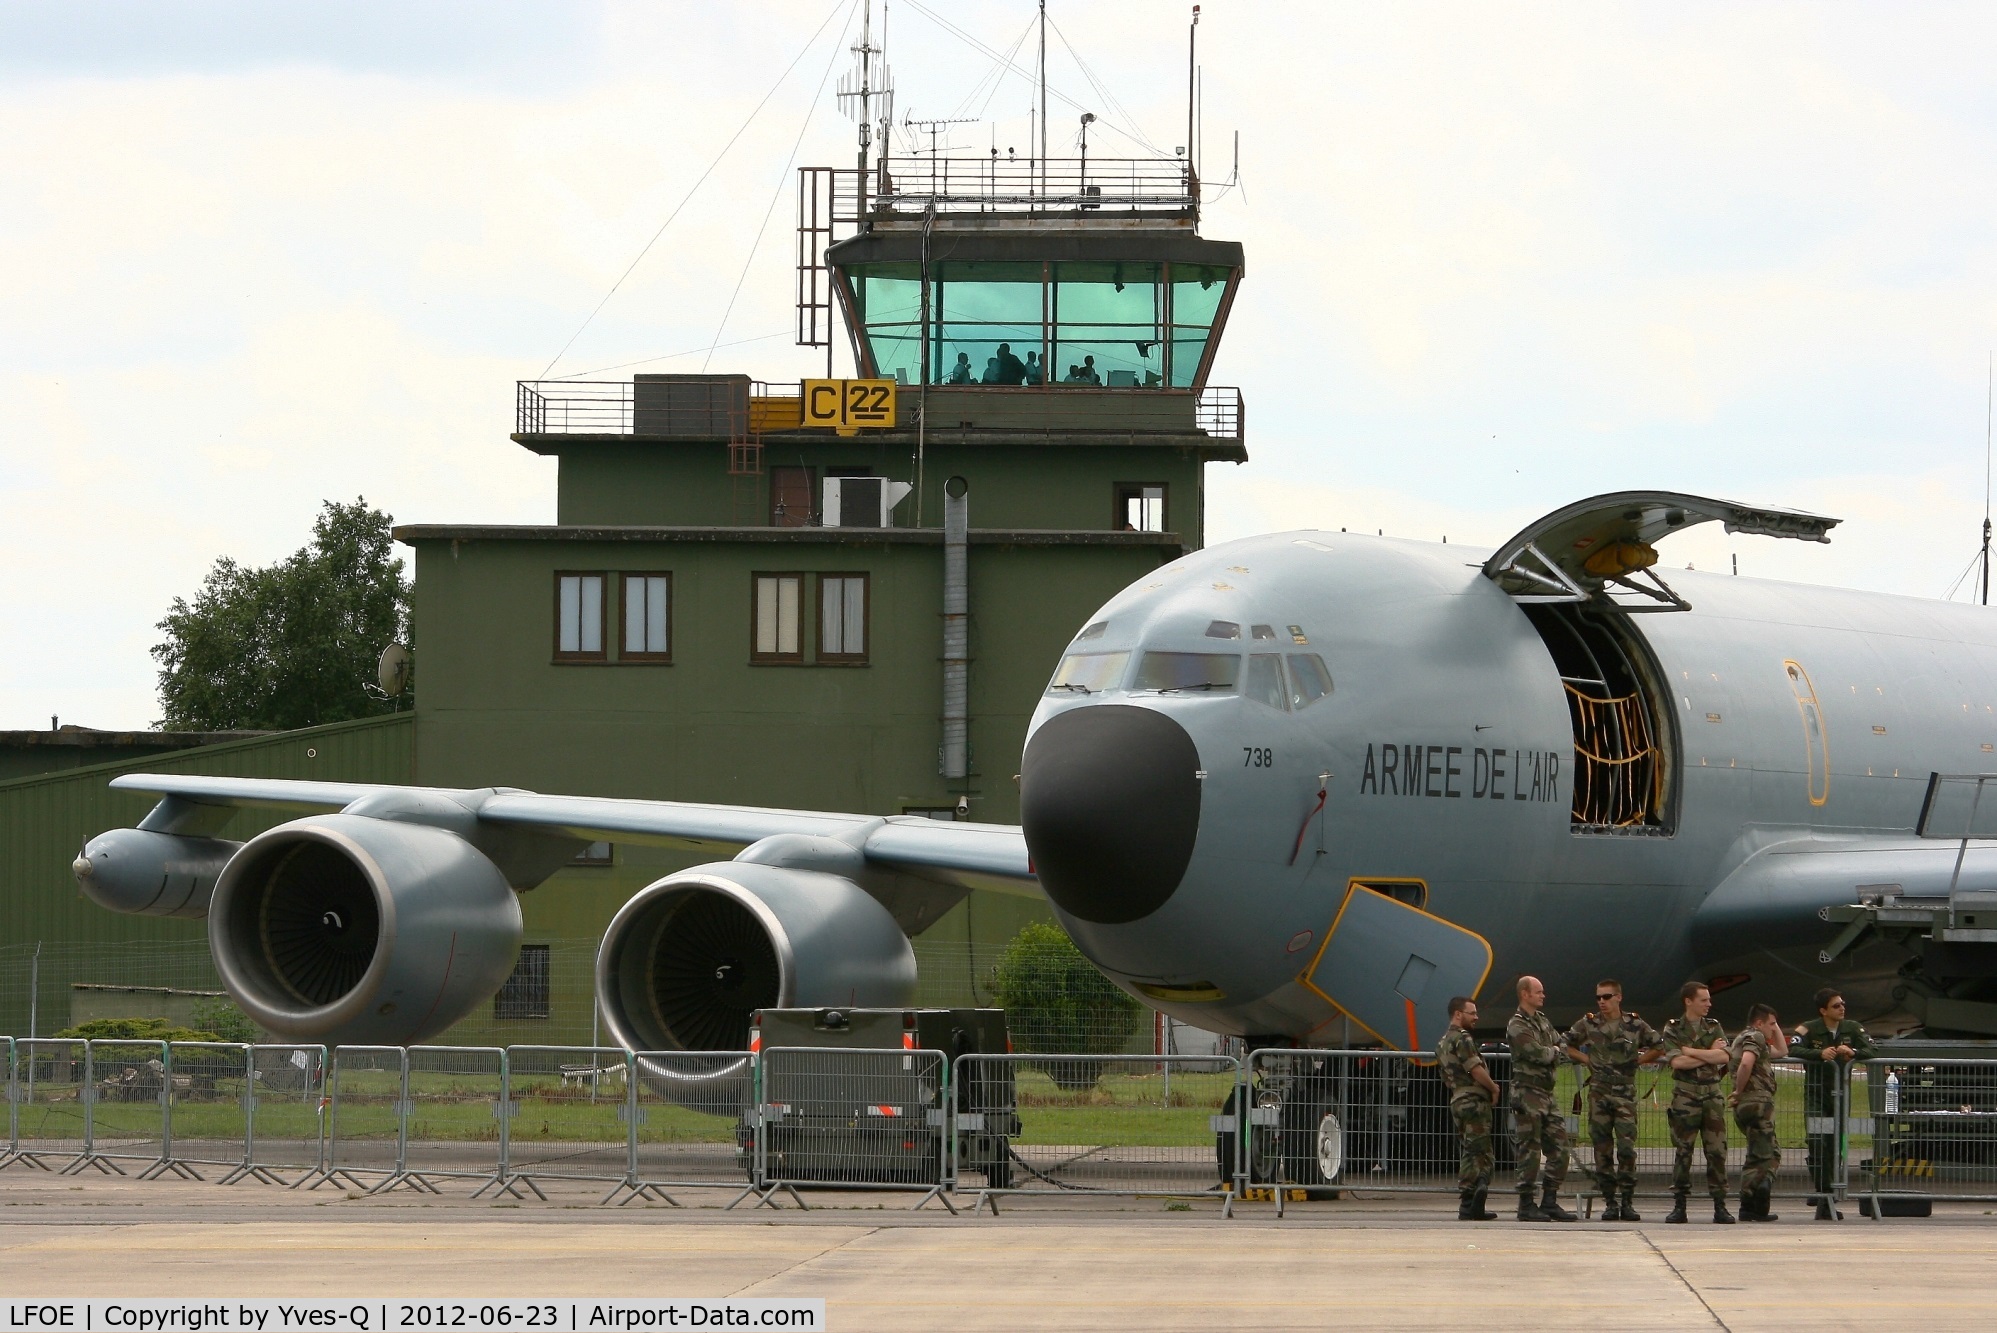 Evreux Fauville Airport, Evreux France (LFOE) - French Air Force Boeing C-135FR Stratotanker on static display, in front of control tower, Evreux-Fauville Air Base (LFOE)